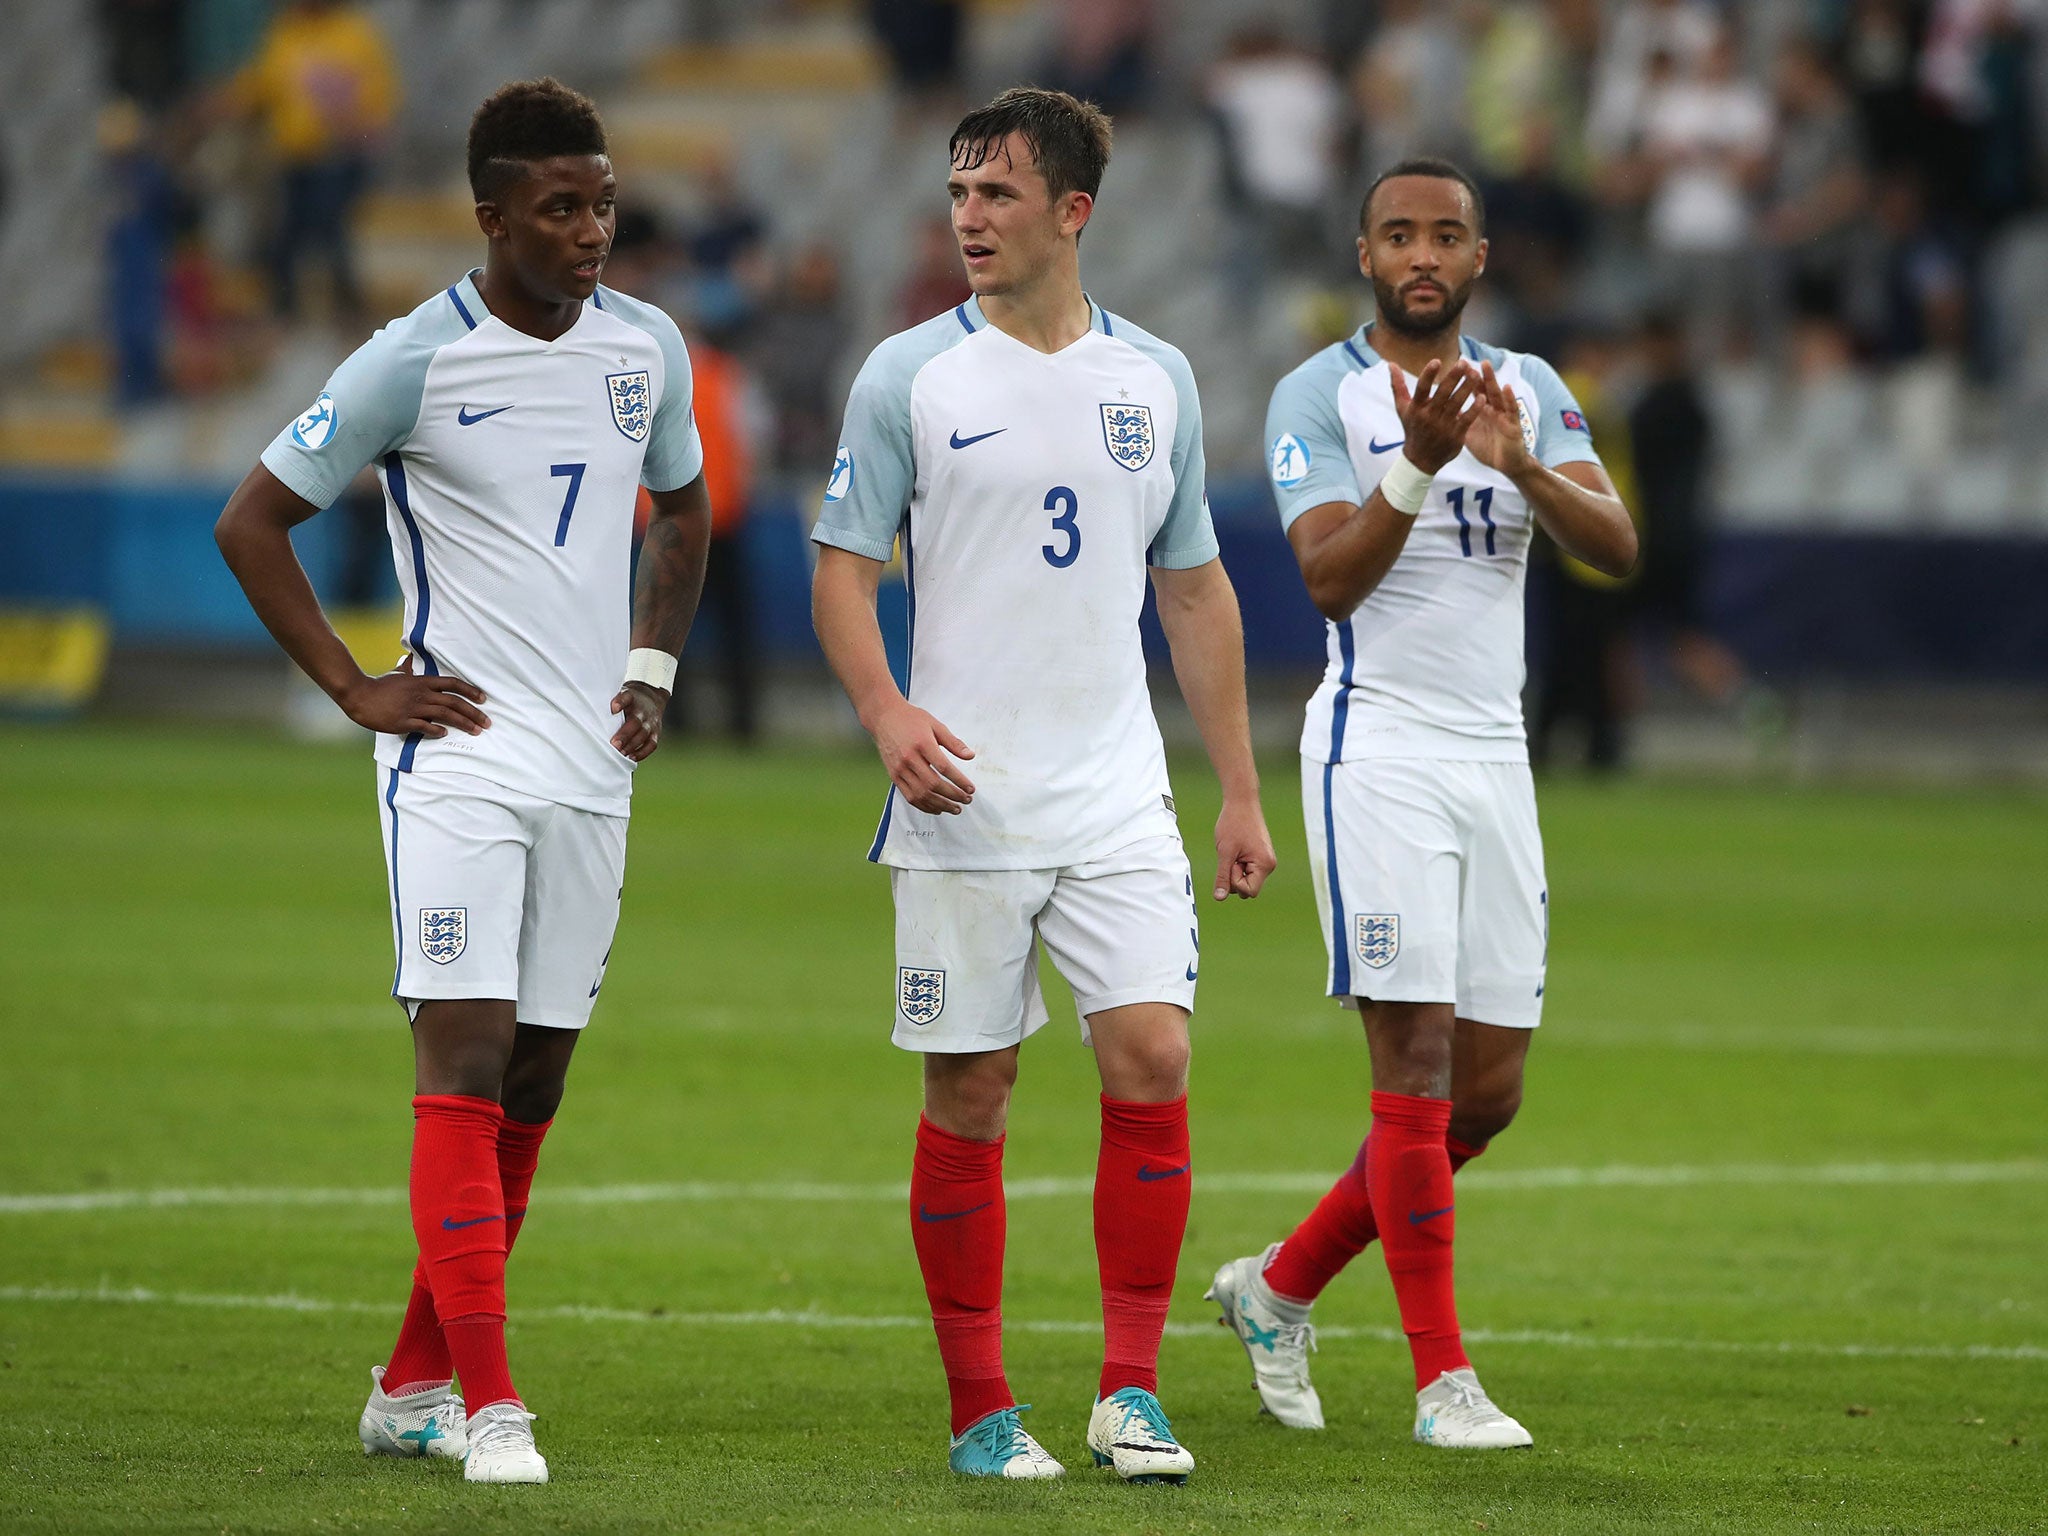 Demarai Gray, Ben Chilwell and Nathan Redmond after the final whistle